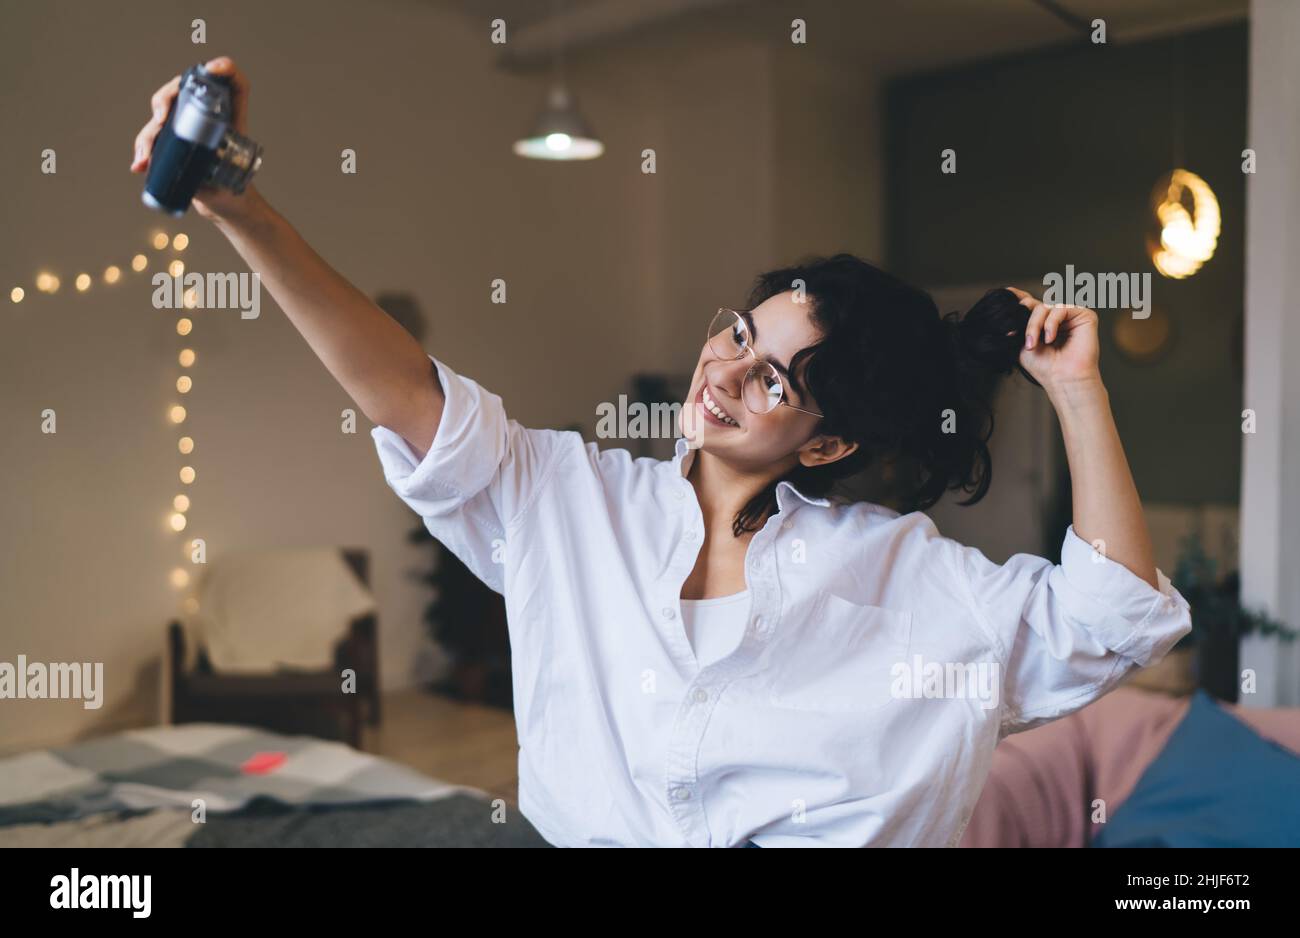 Delighted woman taking selfie on vintage camera in blurred room Stock Photo